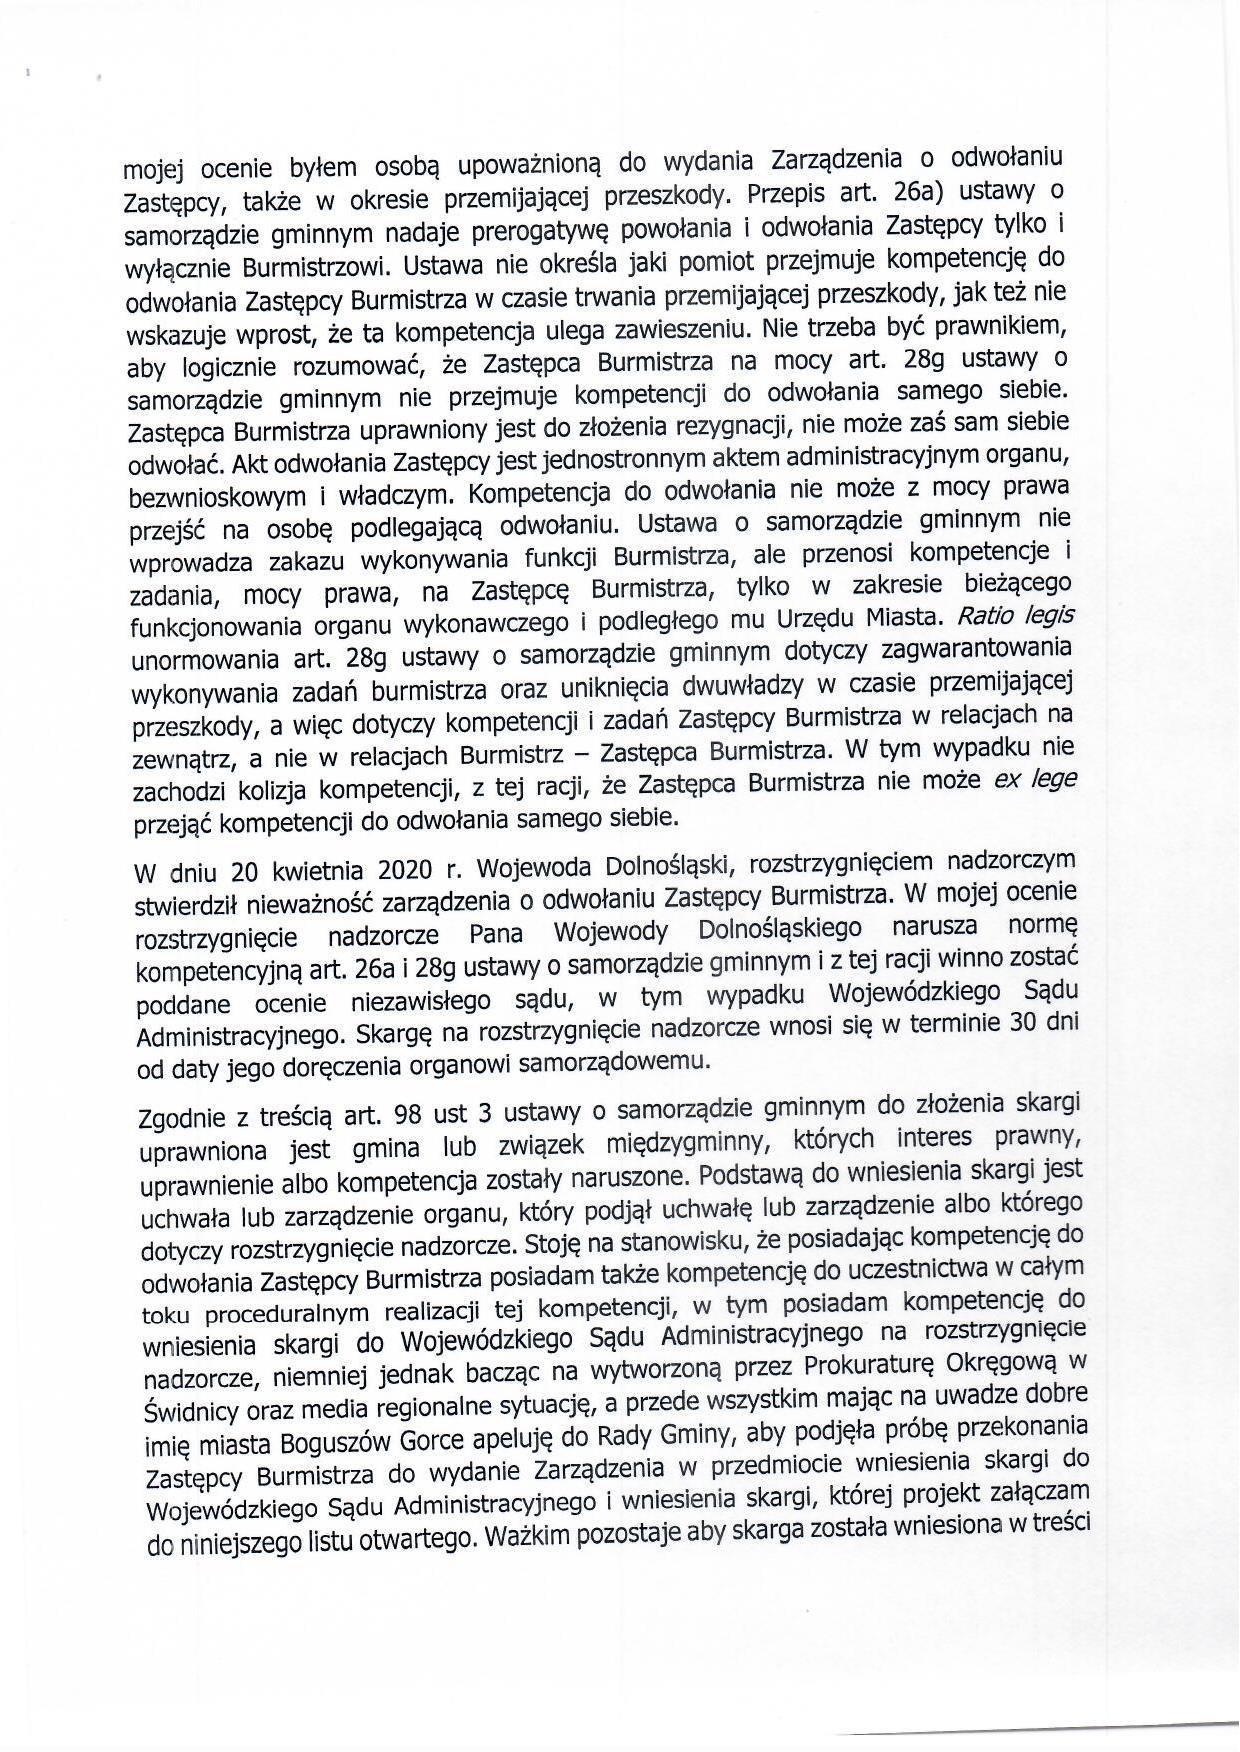 Scan-page-002.jpg